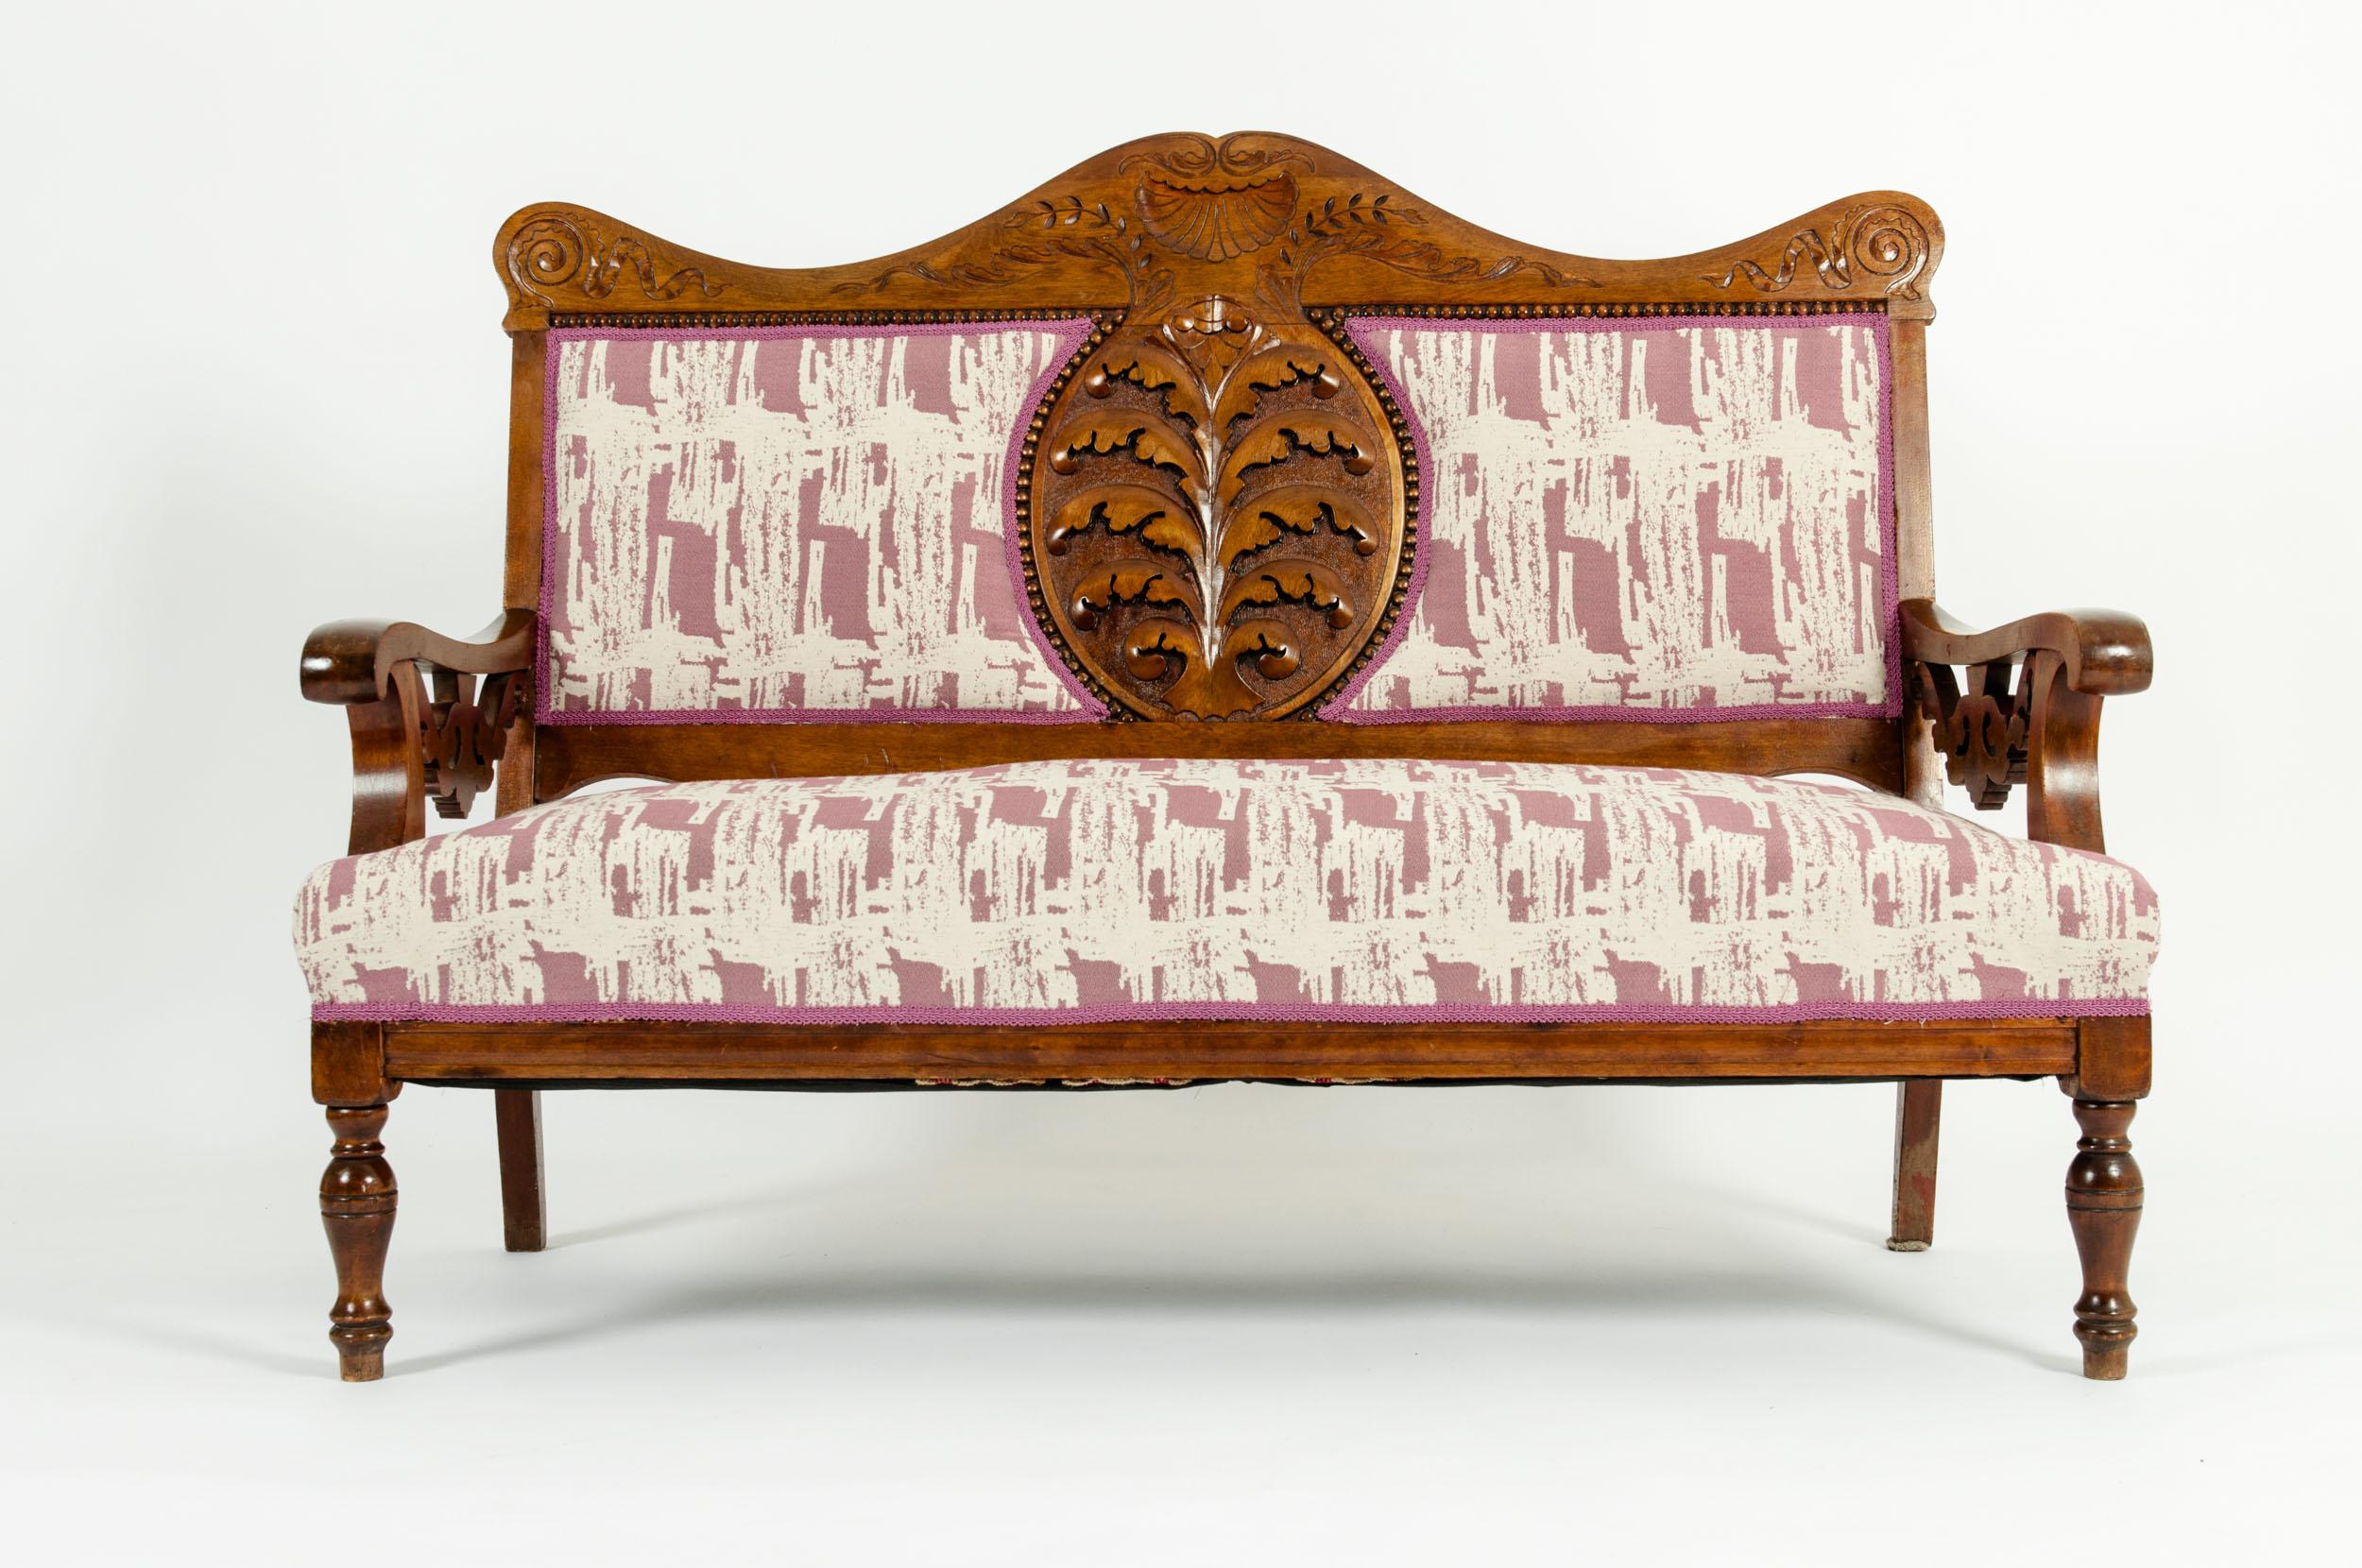 Mid-19th century hand carved mahogany Victorian style settee. The settee is in great antique condition with appropriate wear consistent with age / use. The upholstery is very immaculate. The settee measure about 37 inches high x 51 inches width x 22